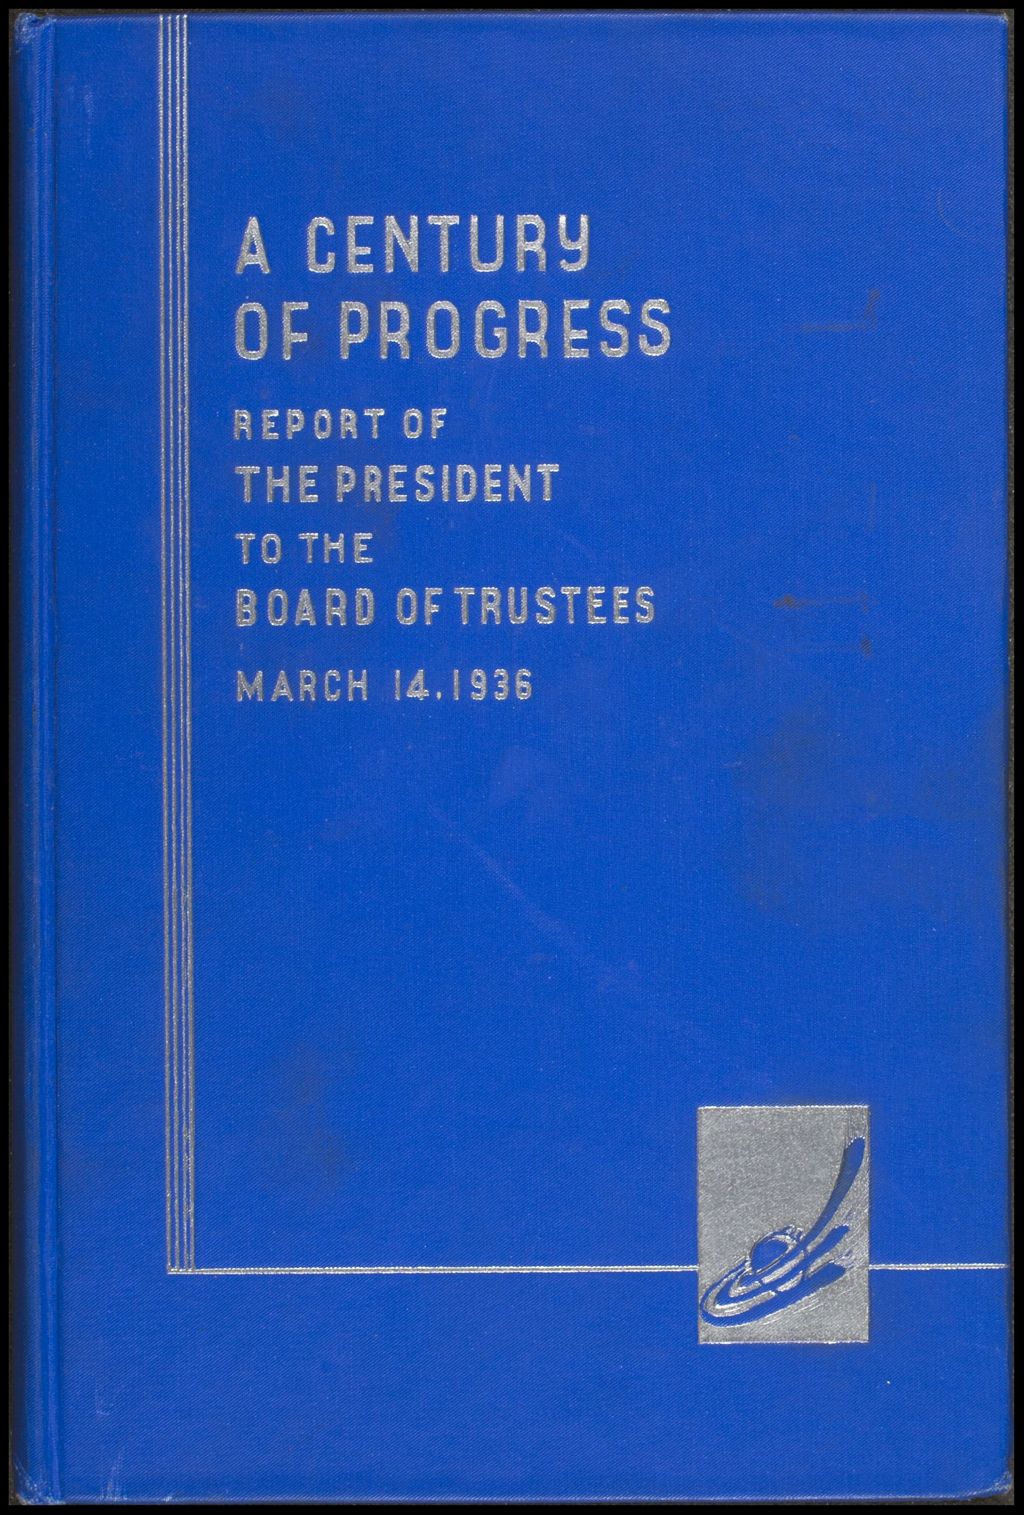 Miniature of Report of the president of A Century of Progress to the Board of Trustees